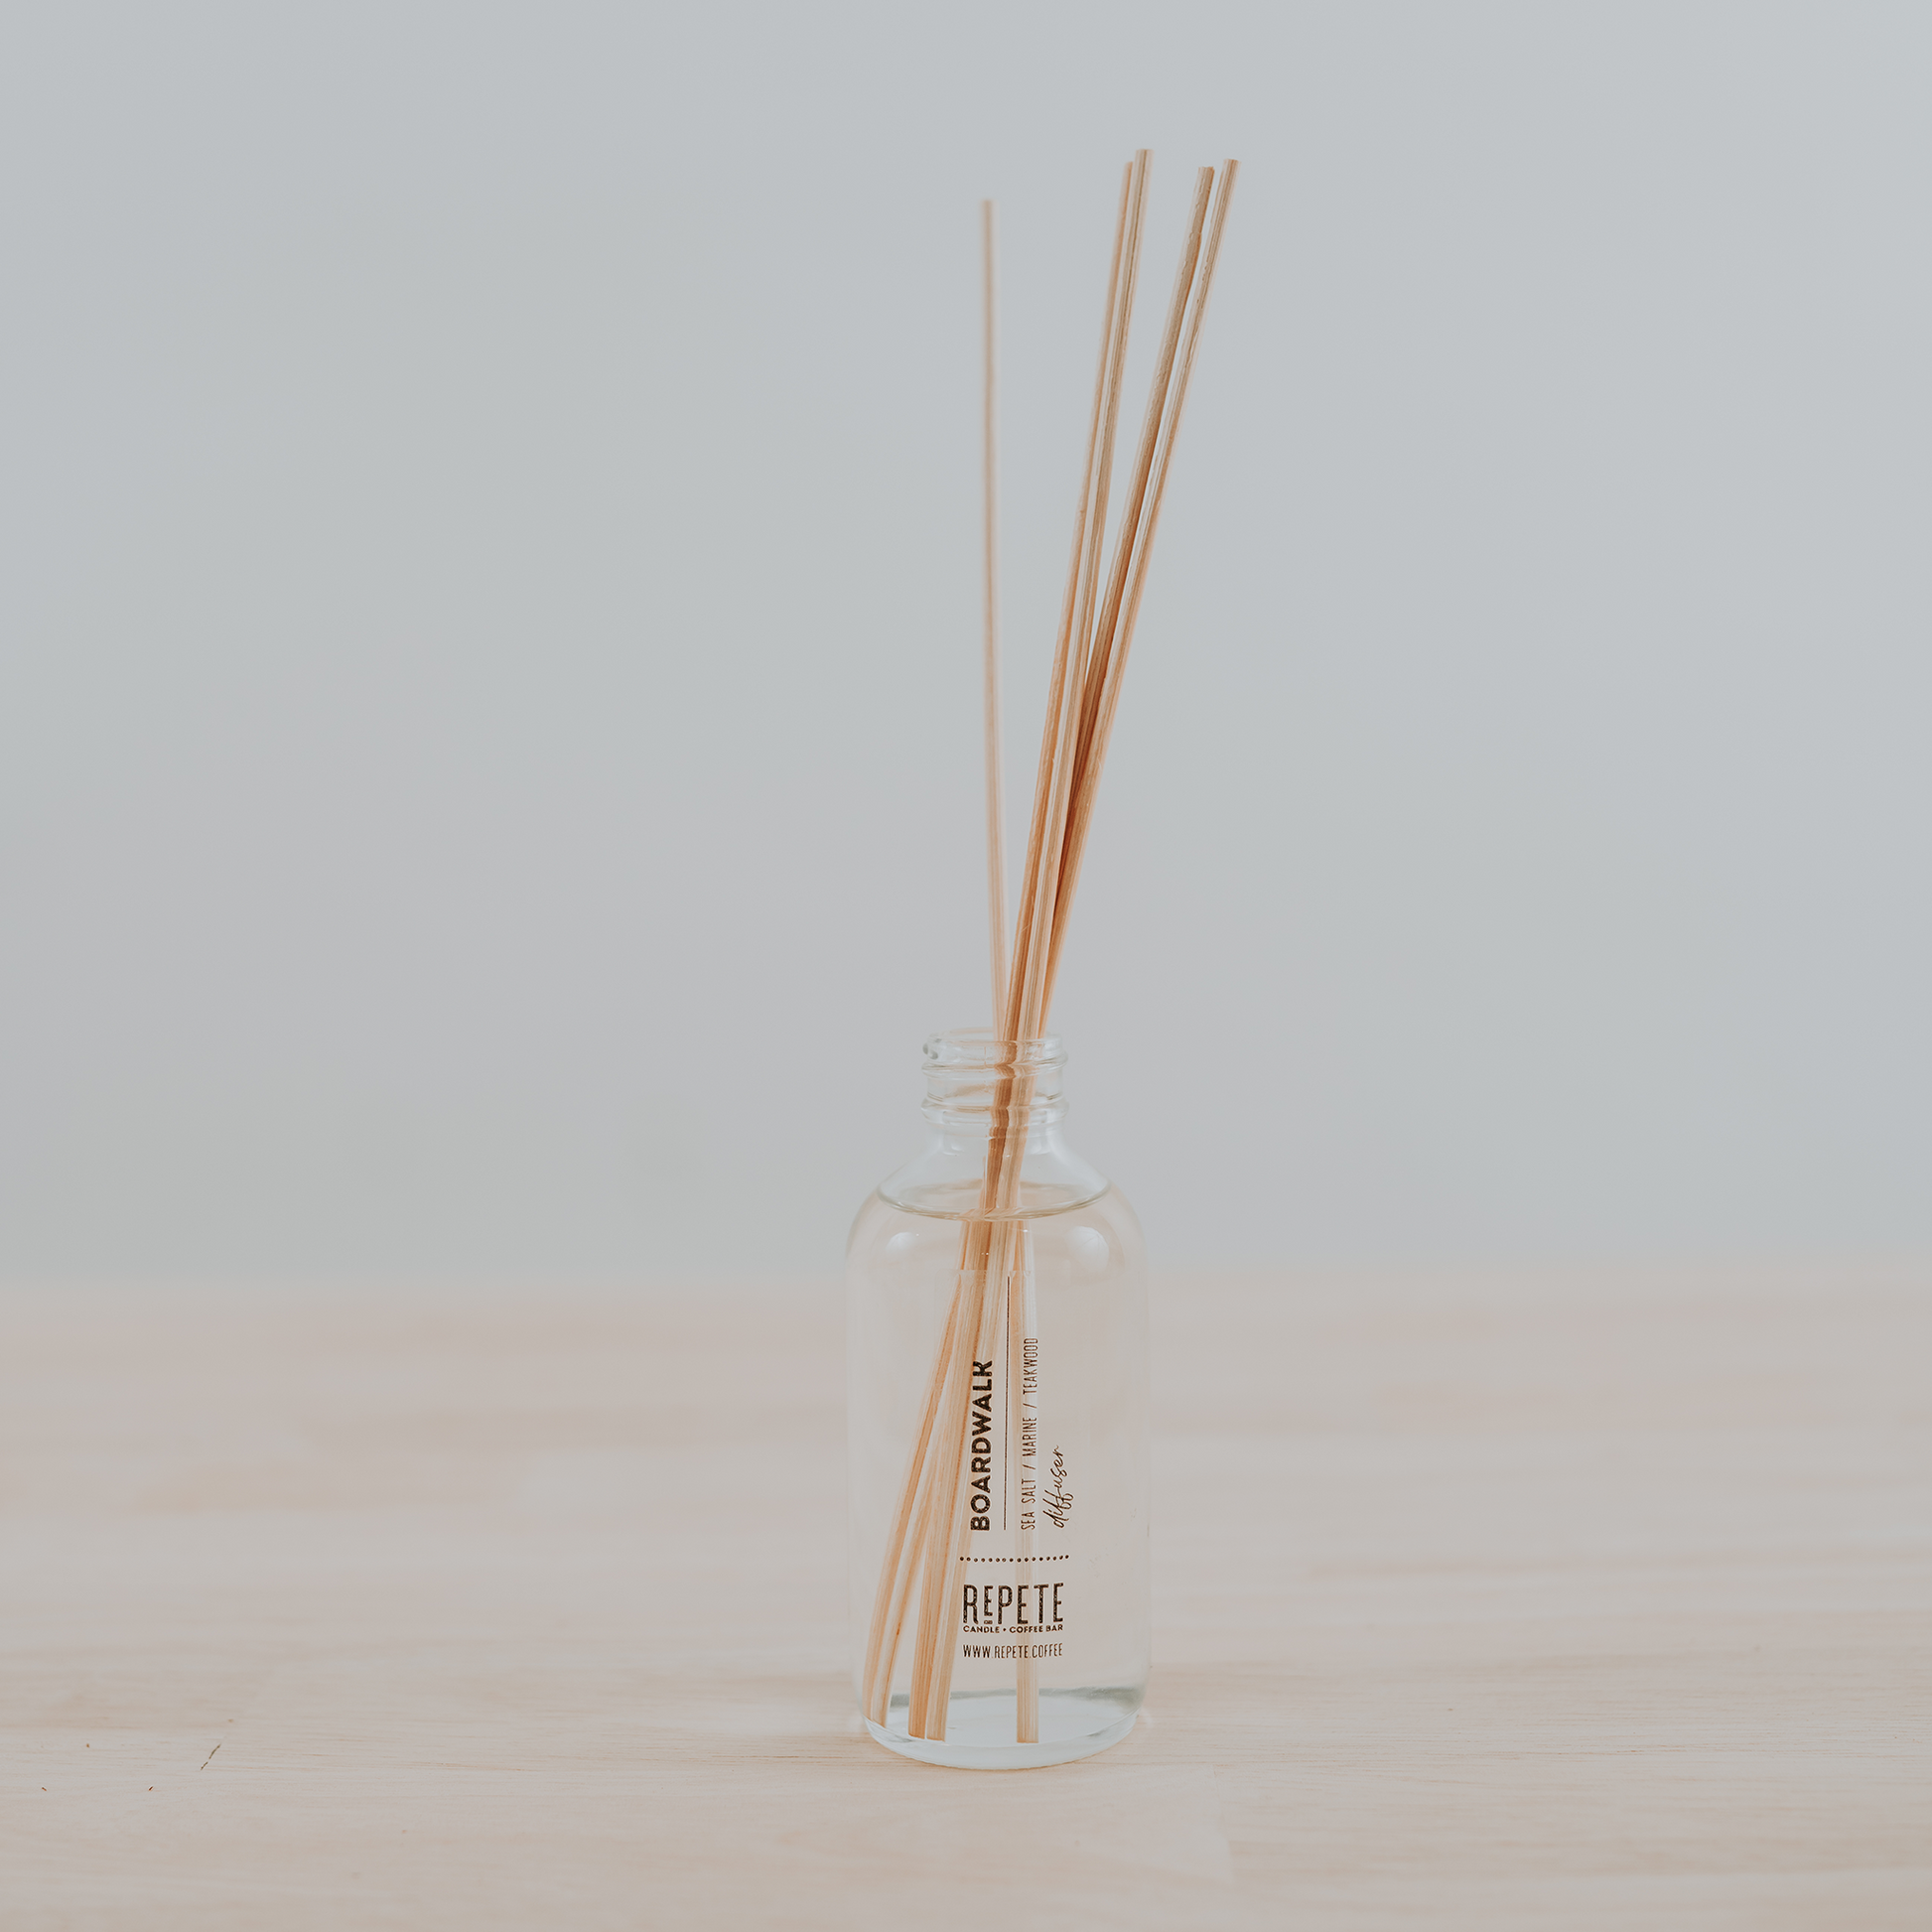 Boardwalk diffuser from Repete Candle and Coffee Bar